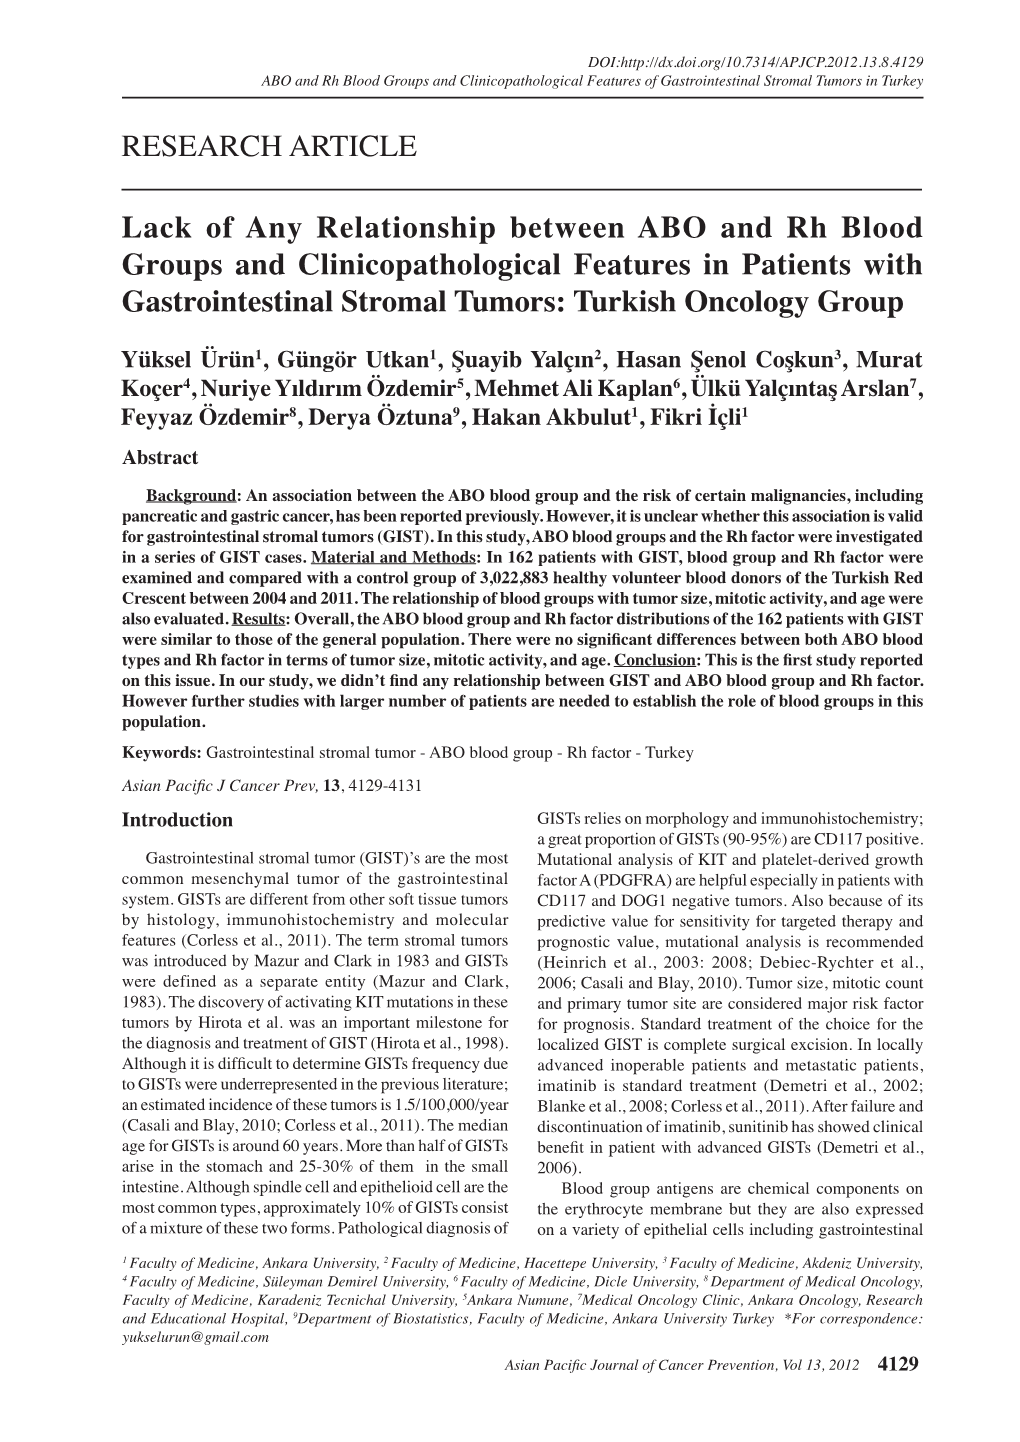 Lack of Any Relationship Between ABO and Rh Blood Groups and Clinicopathological Features in Patients with Gastrointestinal Stromal Tumors: Turkish Oncology Group